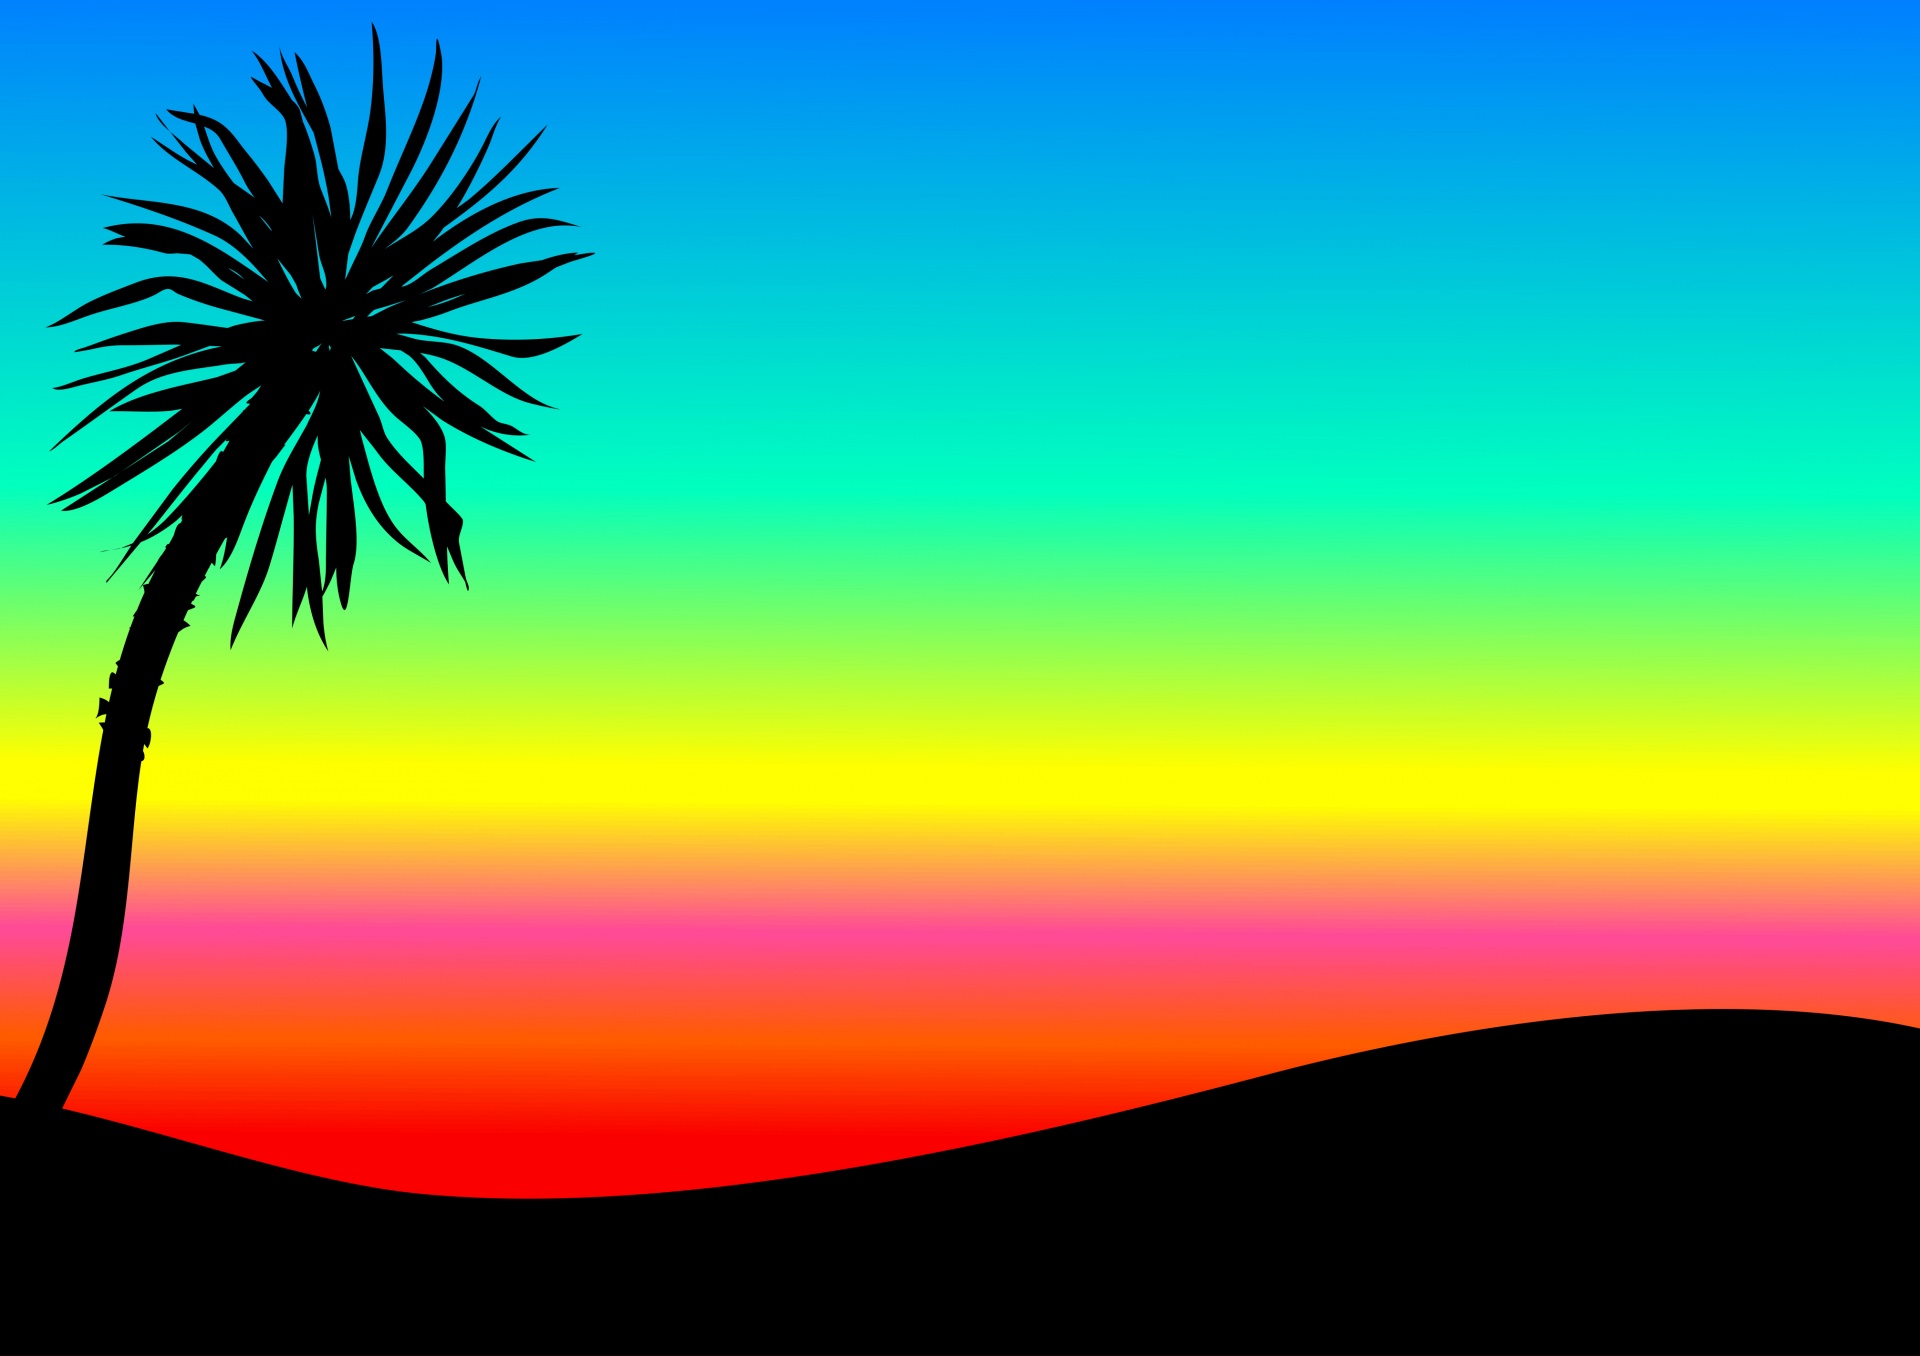 Digital illustration of a sunset sky with silhouette palm tree.